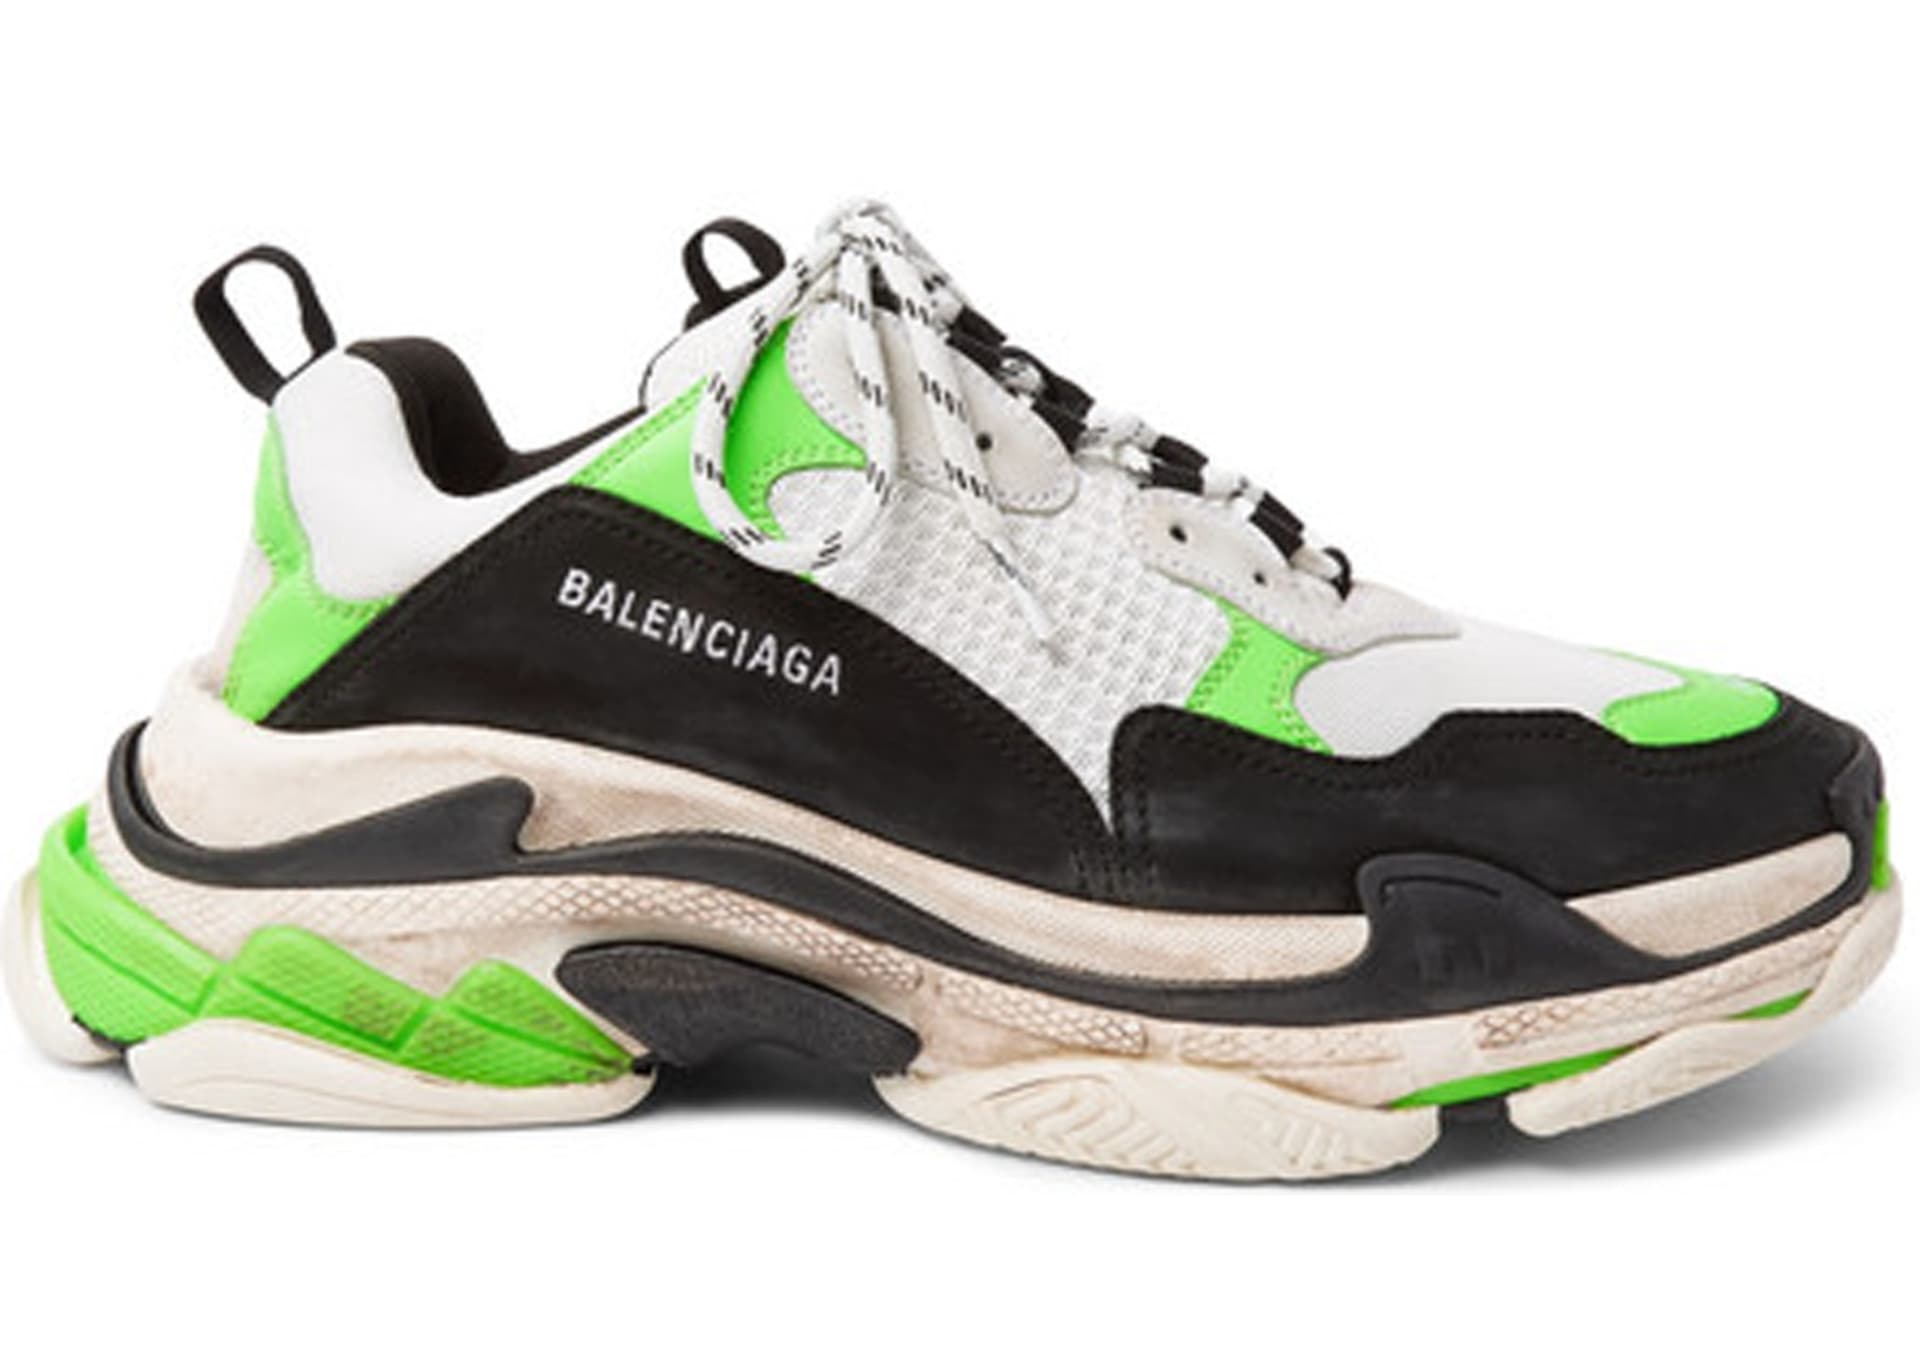 6. Mr Porter x Balenciaga Triple S - The Most Expensive Sneakers of